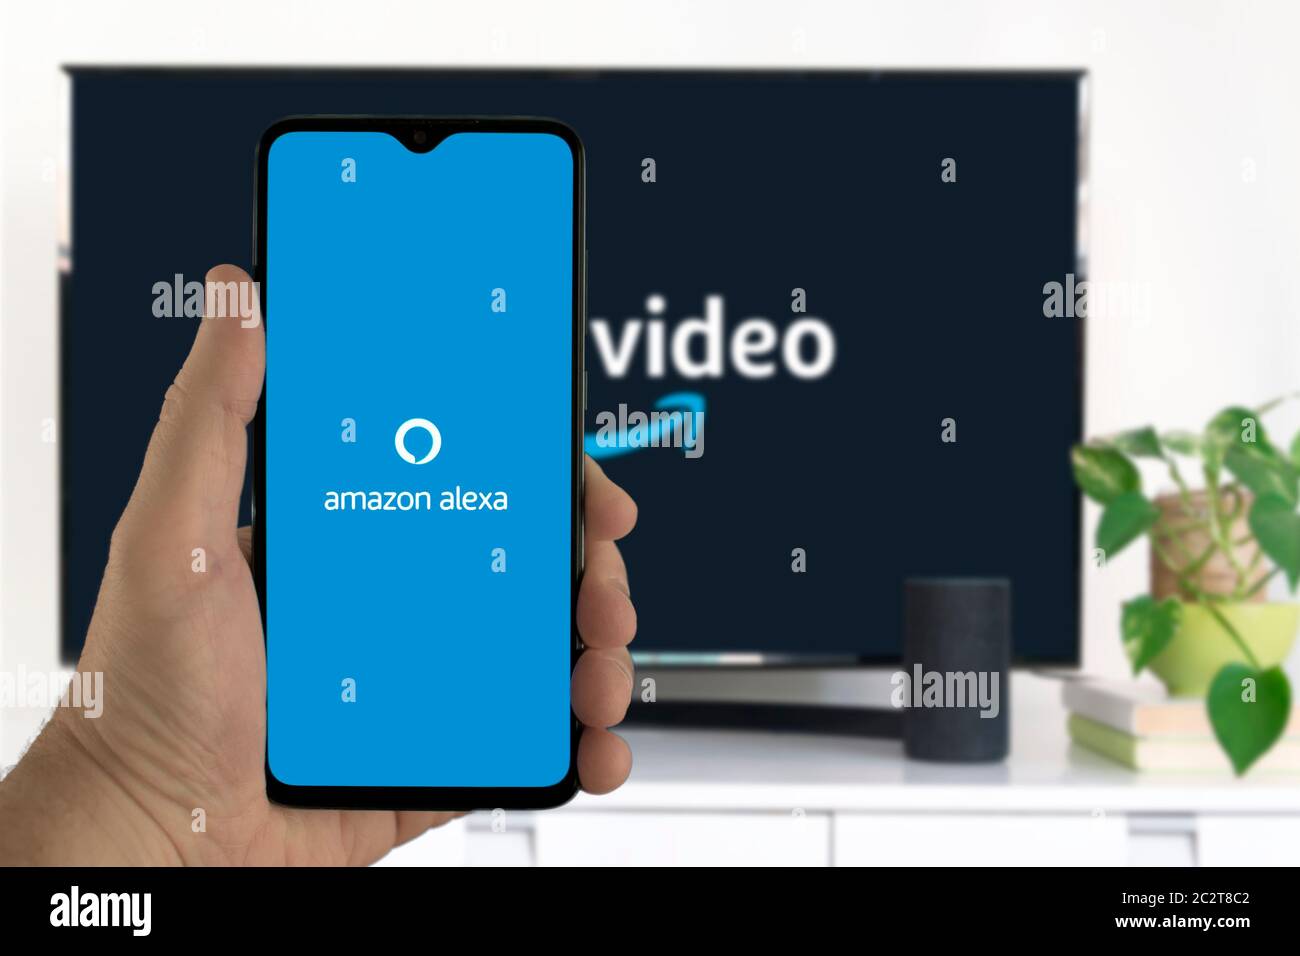 Hand holding a mobile with the Amazon Alexa app icon on it controlling some  home automation system and gadgets Stock Photo - Alamy